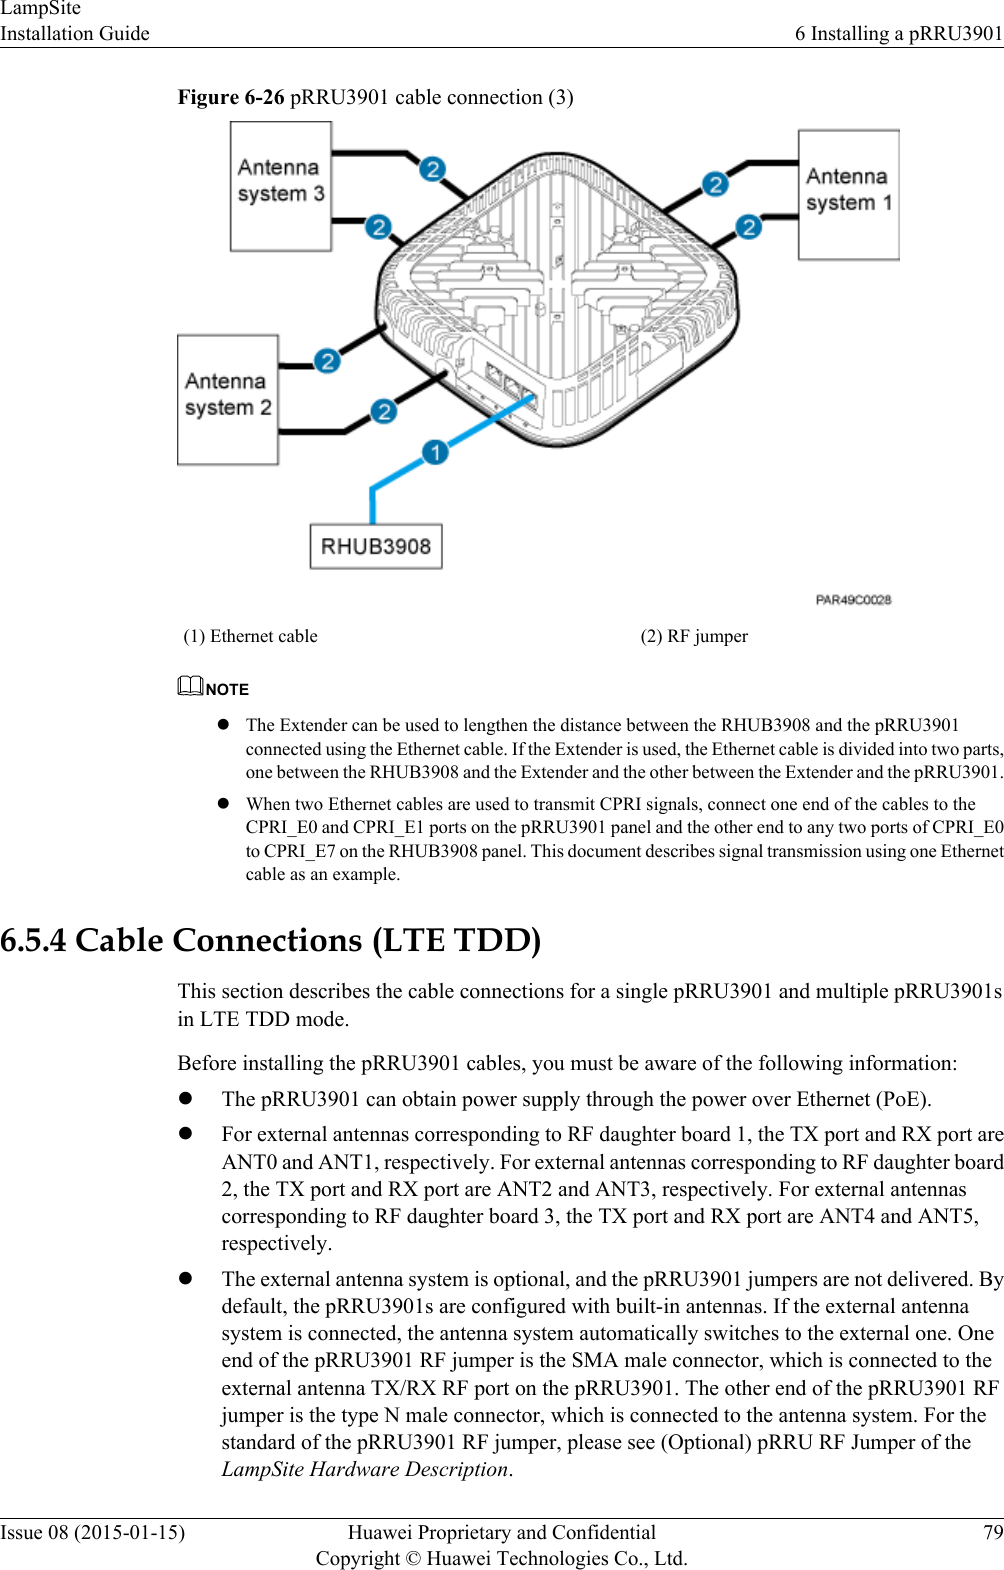 Figure 6-26 pRRU3901 cable connection (3)(1) Ethernet cable (2) RF jumperNOTElThe Extender can be used to lengthen the distance between the RHUB3908 and the pRRU3901connected using the Ethernet cable. If the Extender is used, the Ethernet cable is divided into two parts,one between the RHUB3908 and the Extender and the other between the Extender and the pRRU3901.lWhen two Ethernet cables are used to transmit CPRI signals, connect one end of the cables to theCPRI_E0 and CPRI_E1 ports on the pRRU3901 panel and the other end to any two ports of CPRI_E0to CPRI_E7 on the RHUB3908 panel. This document describes signal transmission using one Ethernetcable as an example.6.5.4 Cable Connections (LTE TDD)This section describes the cable connections for a single pRRU3901 and multiple pRRU3901sin LTE TDD mode.Before installing the pRRU3901 cables, you must be aware of the following information:lThe pRRU3901 can obtain power supply through the power over Ethernet (PoE).lFor external antennas corresponding to RF daughter board 1, the TX port and RX port areANT0 and ANT1, respectively. For external antennas corresponding to RF daughter board2, the TX port and RX port are ANT2 and ANT3, respectively. For external antennascorresponding to RF daughter board 3, the TX port and RX port are ANT4 and ANT5,respectively.lThe external antenna system is optional, and the pRRU3901 jumpers are not delivered. Bydefault, the pRRU3901s are configured with built-in antennas. If the external antennasystem is connected, the antenna system automatically switches to the external one. Oneend of the pRRU3901 RF jumper is the SMA male connector, which is connected to theexternal antenna TX/RX RF port on the pRRU3901. The other end of the pRRU3901 RFjumper is the type N male connector, which is connected to the antenna system. For thestandard of the pRRU3901 RF jumper, please see (Optional) pRRU RF Jumper of theLampSite Hardware Description.LampSiteInstallation Guide 6 Installing a pRRU3901Issue 08 (2015-01-15) Huawei Proprietary and ConfidentialCopyright © Huawei Technologies Co., Ltd.79